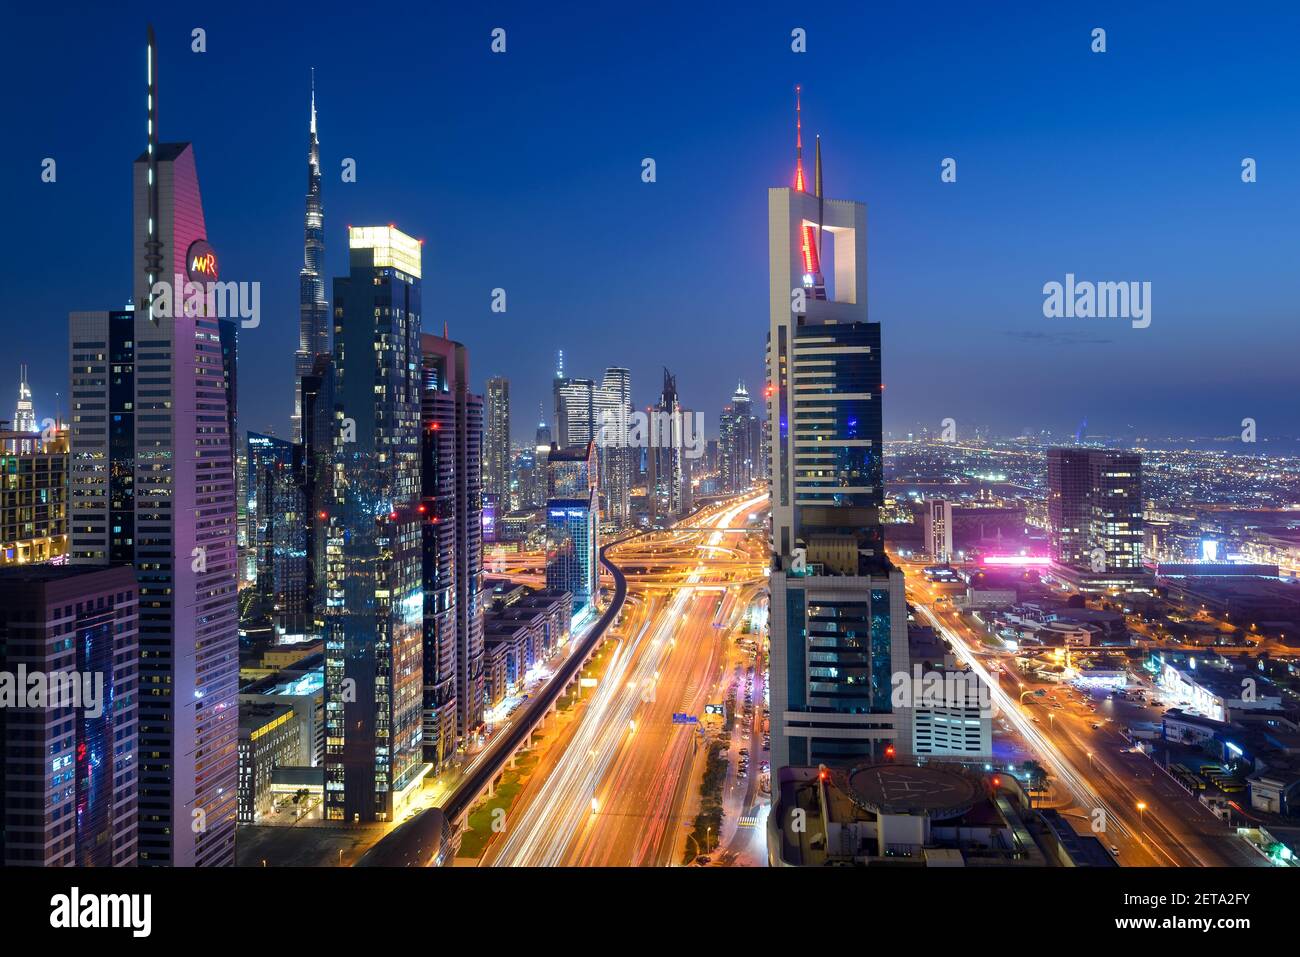 Dubai skyline at night. Multiple modern skyscrapers by Sheikh Zayed Road and highway at Dubai, United Arab Emirates. Tall buildings at Dubai Emirate. Stock Photo